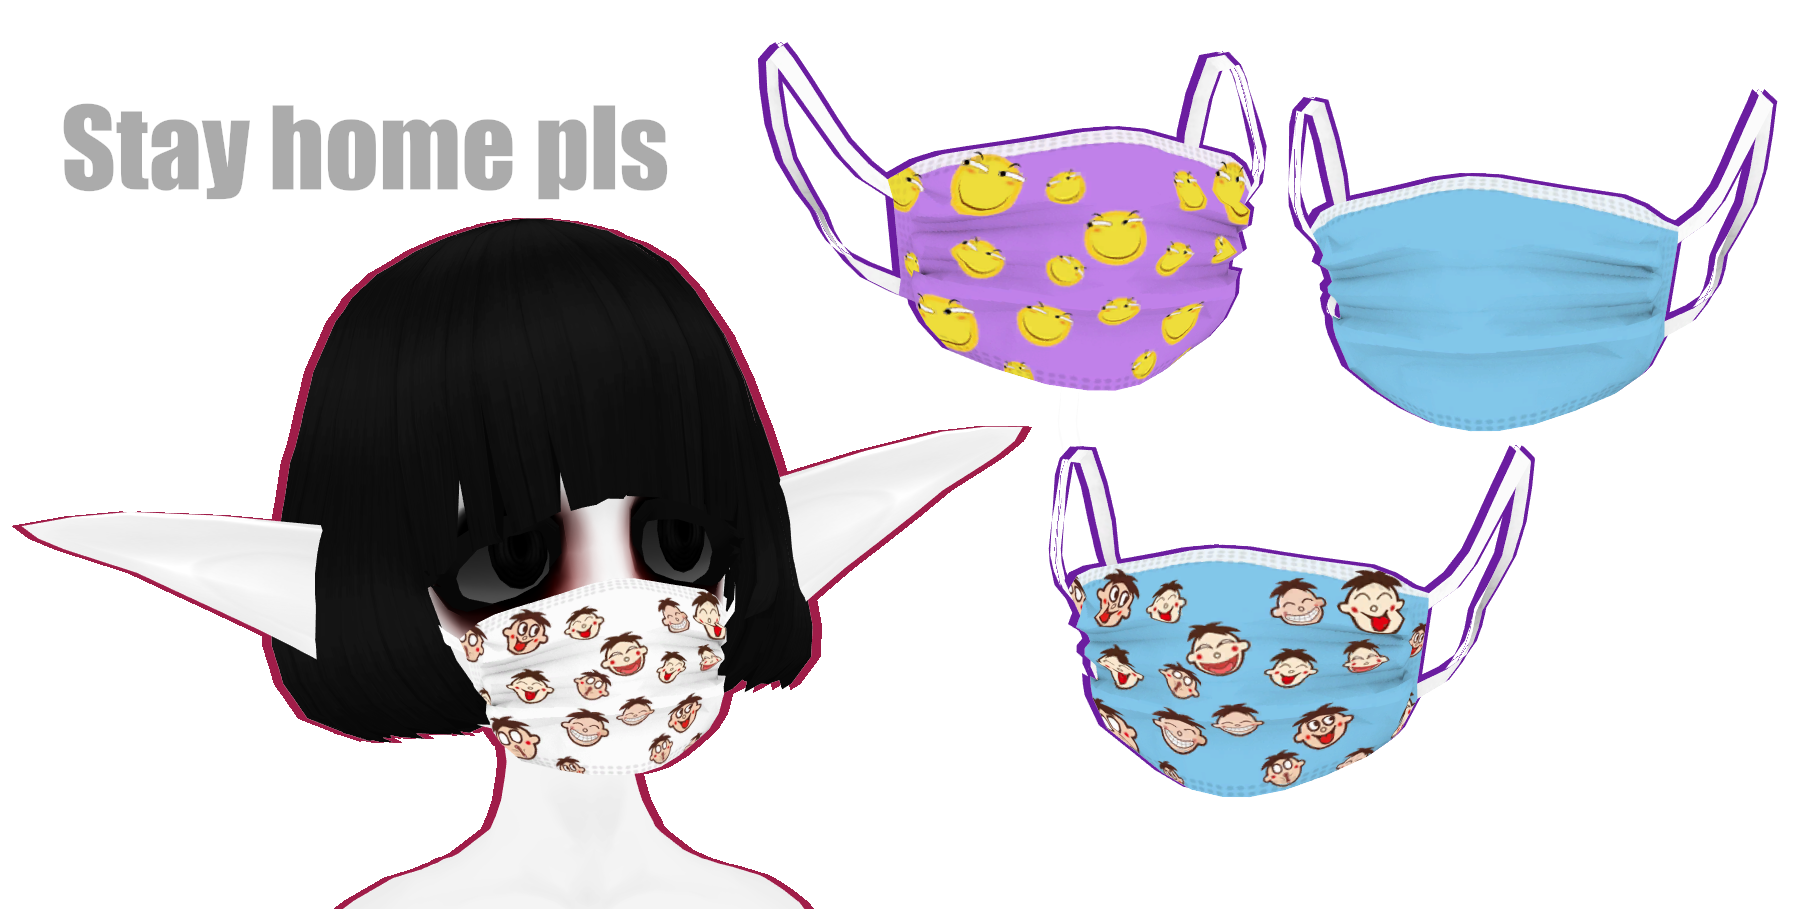 kage opladning Betjening mulig MMDxDL] Sims 4 Medical Mask by 8Tuesday8 on DeviantArt